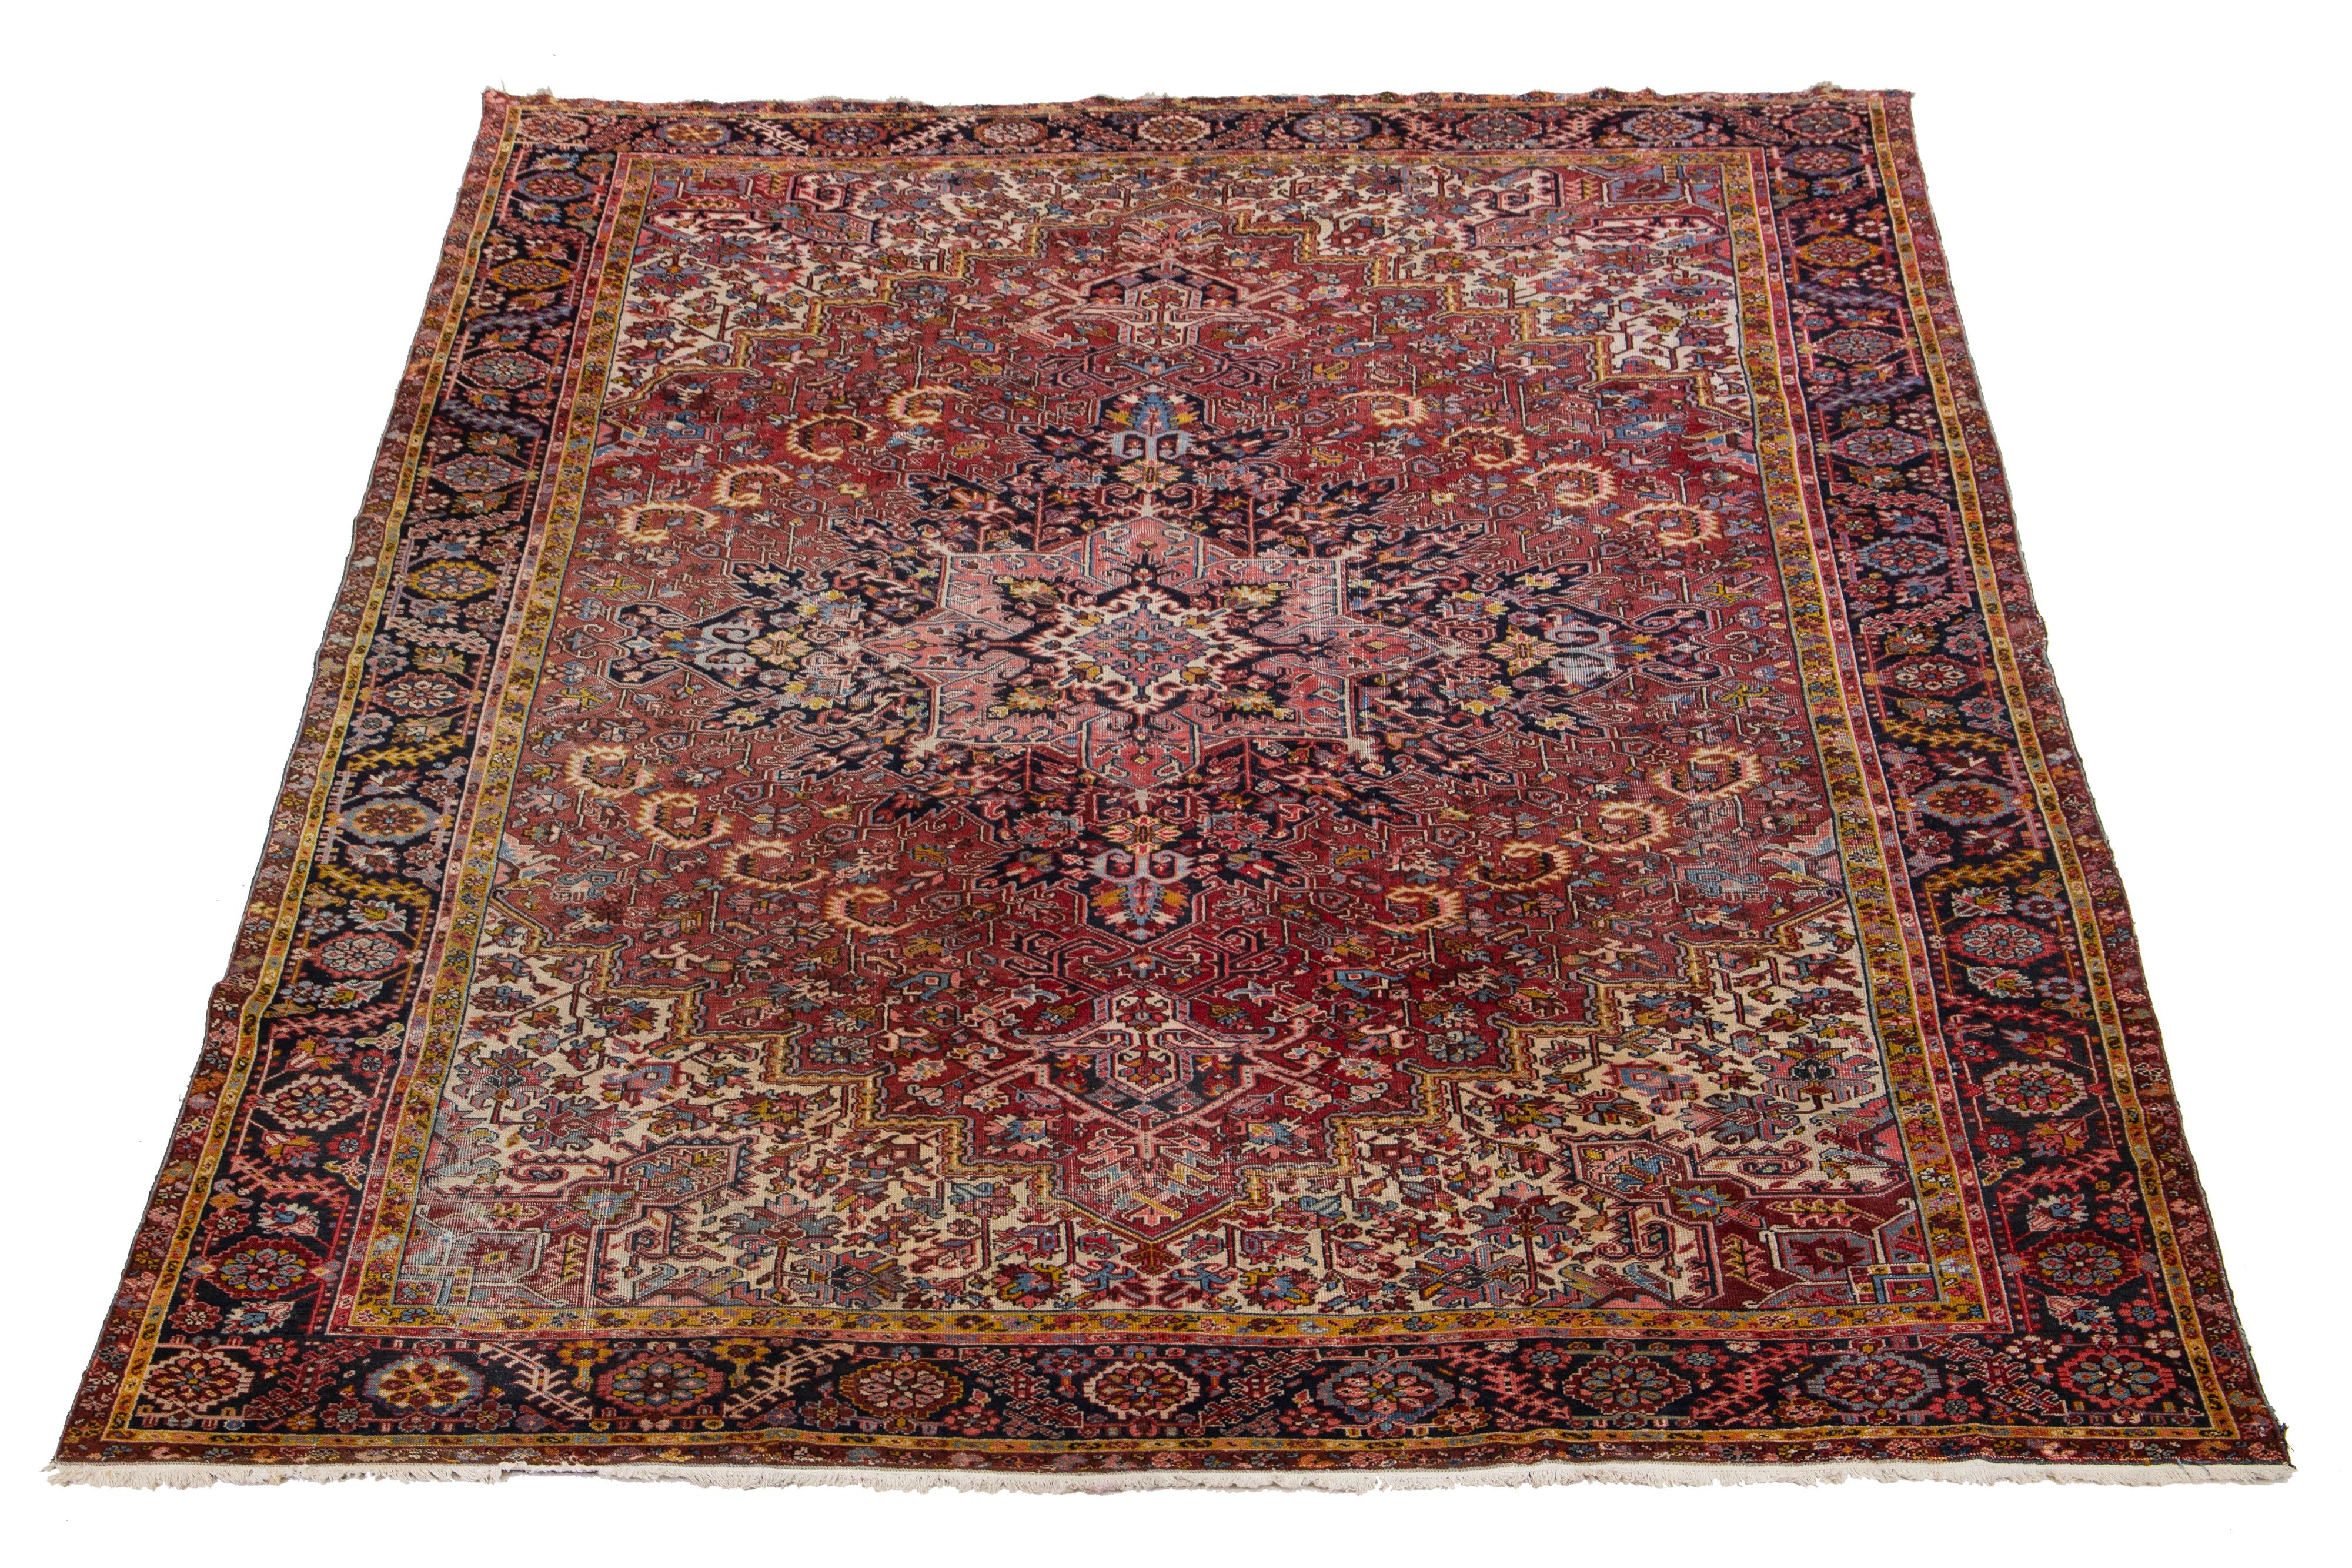 This antique Persian Heriz rug is made with hand-knotted wool. The red field showcases a captivating tribal pattern with multicolor shades.

This rug measures 11'2